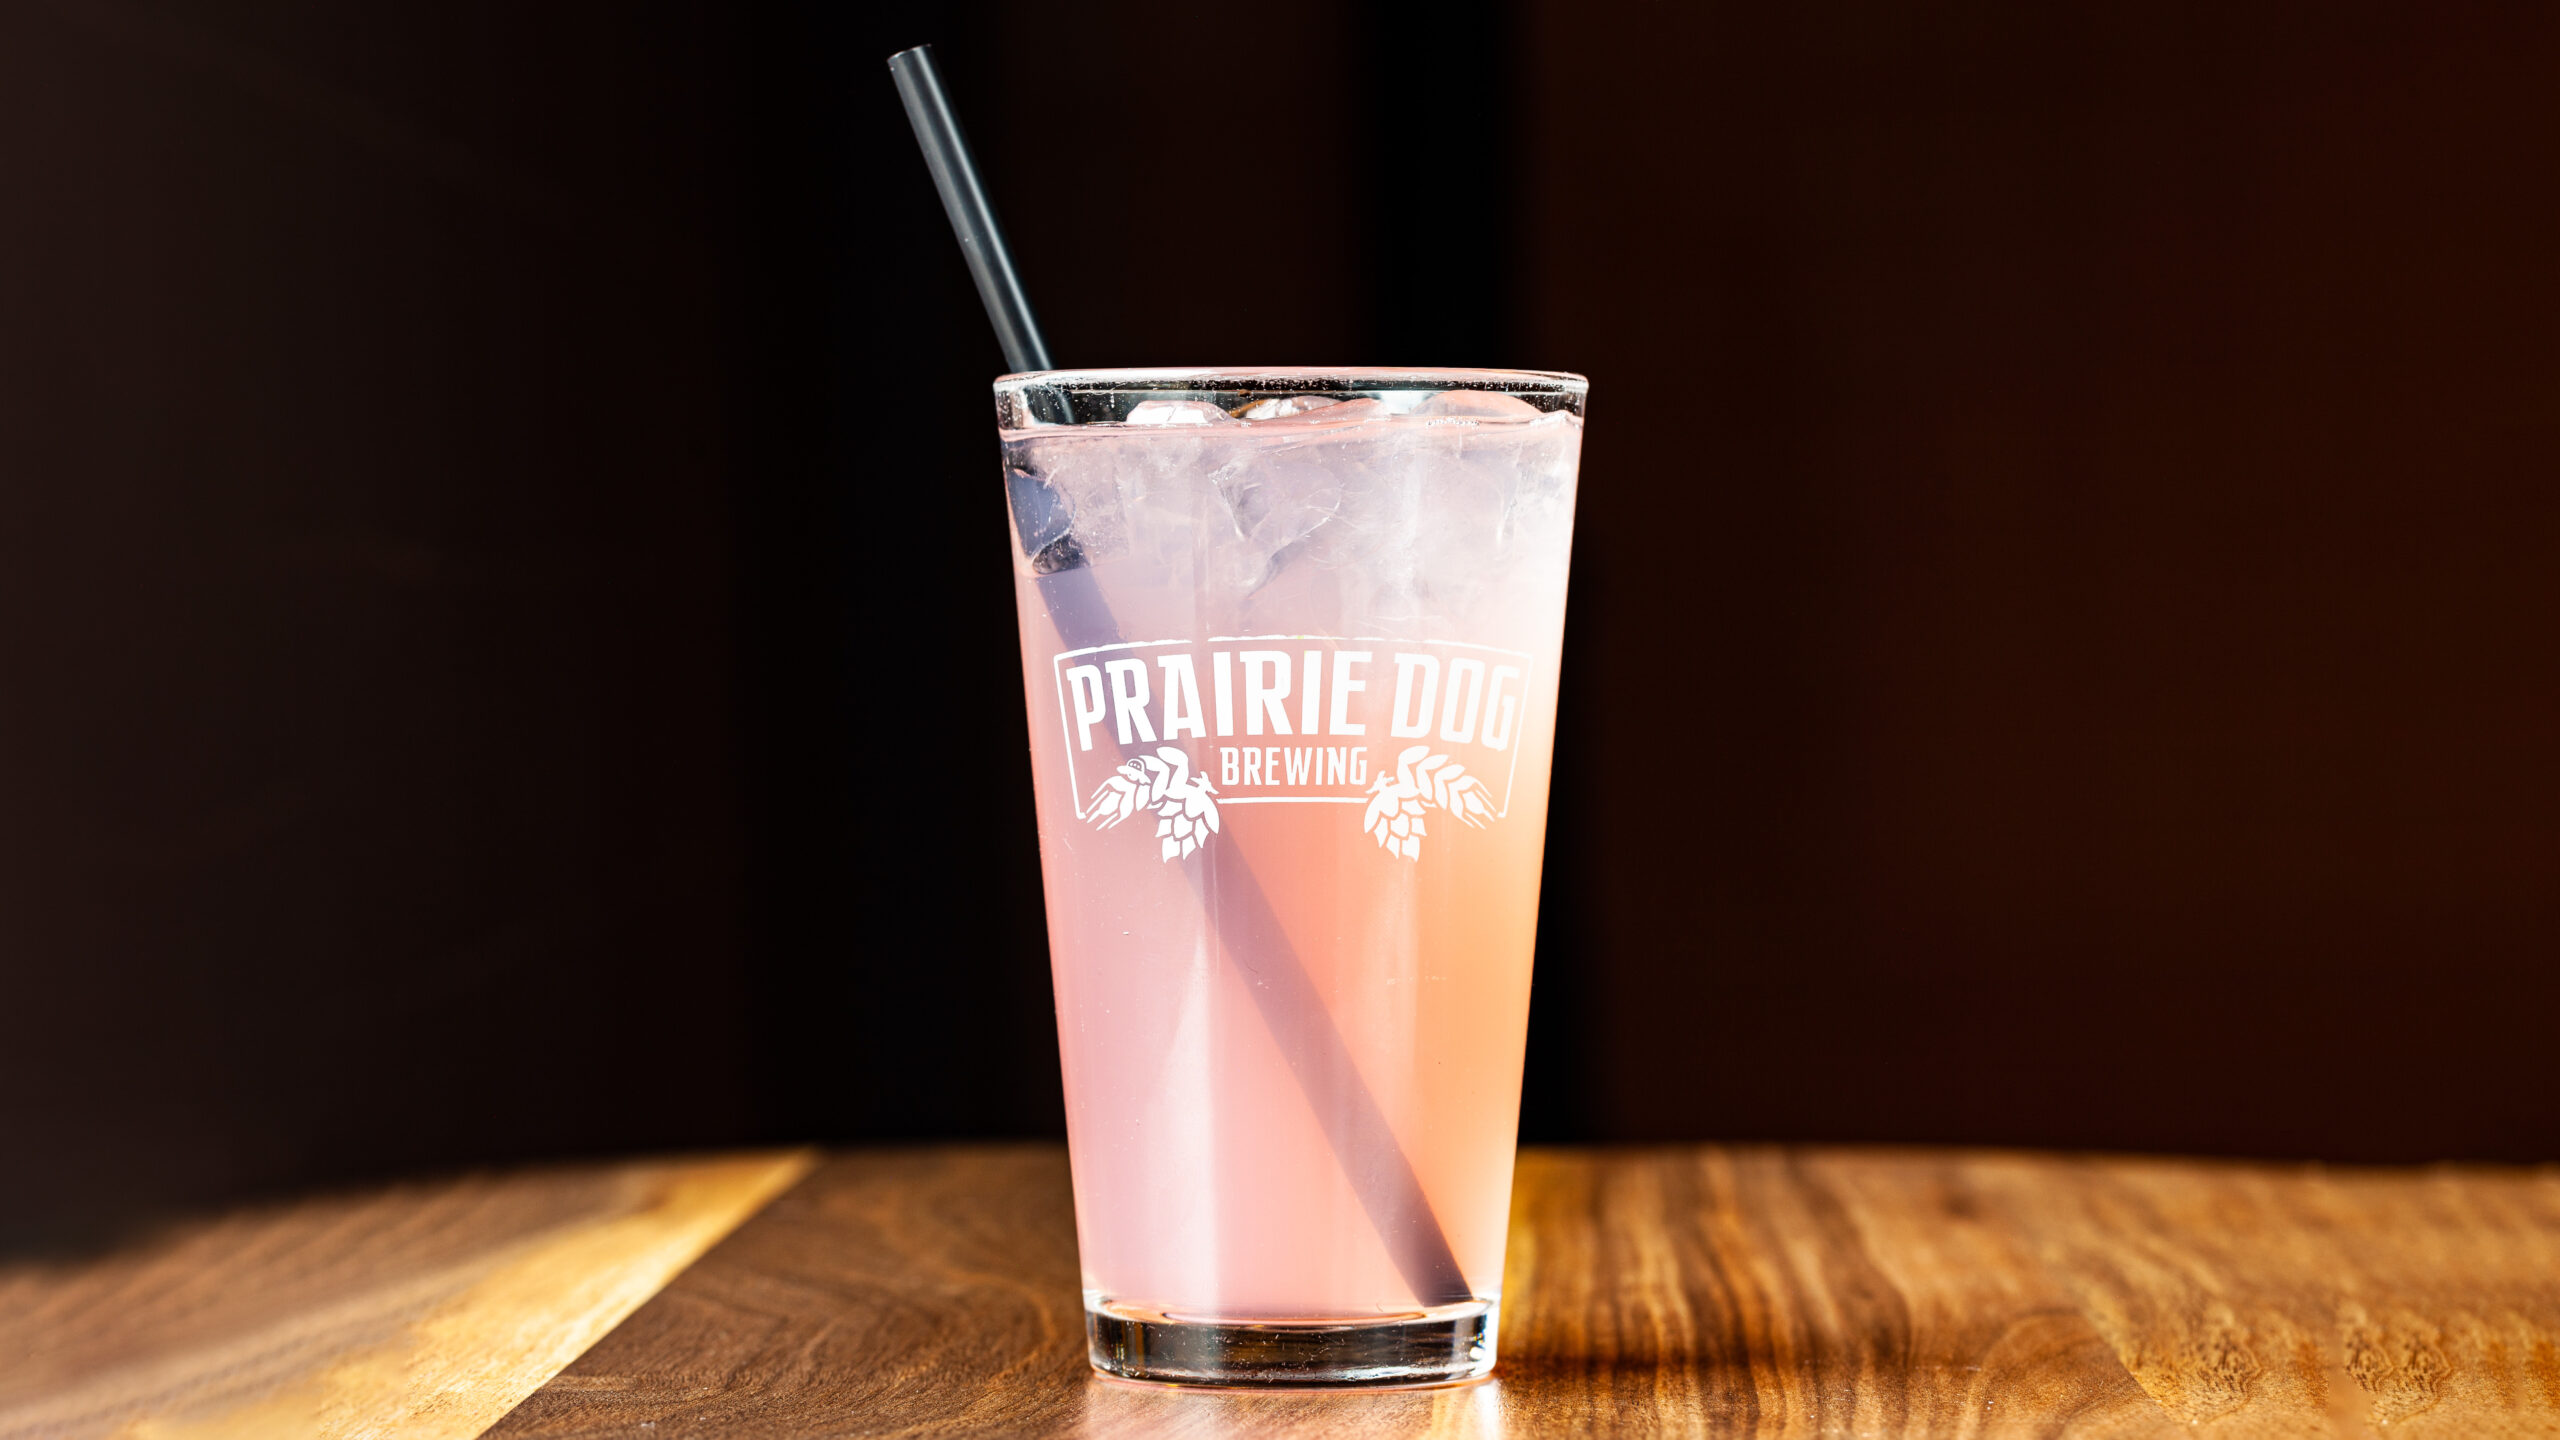 A delicious glass of Prairie Dog's pink Lemonade, a dine-in treat.